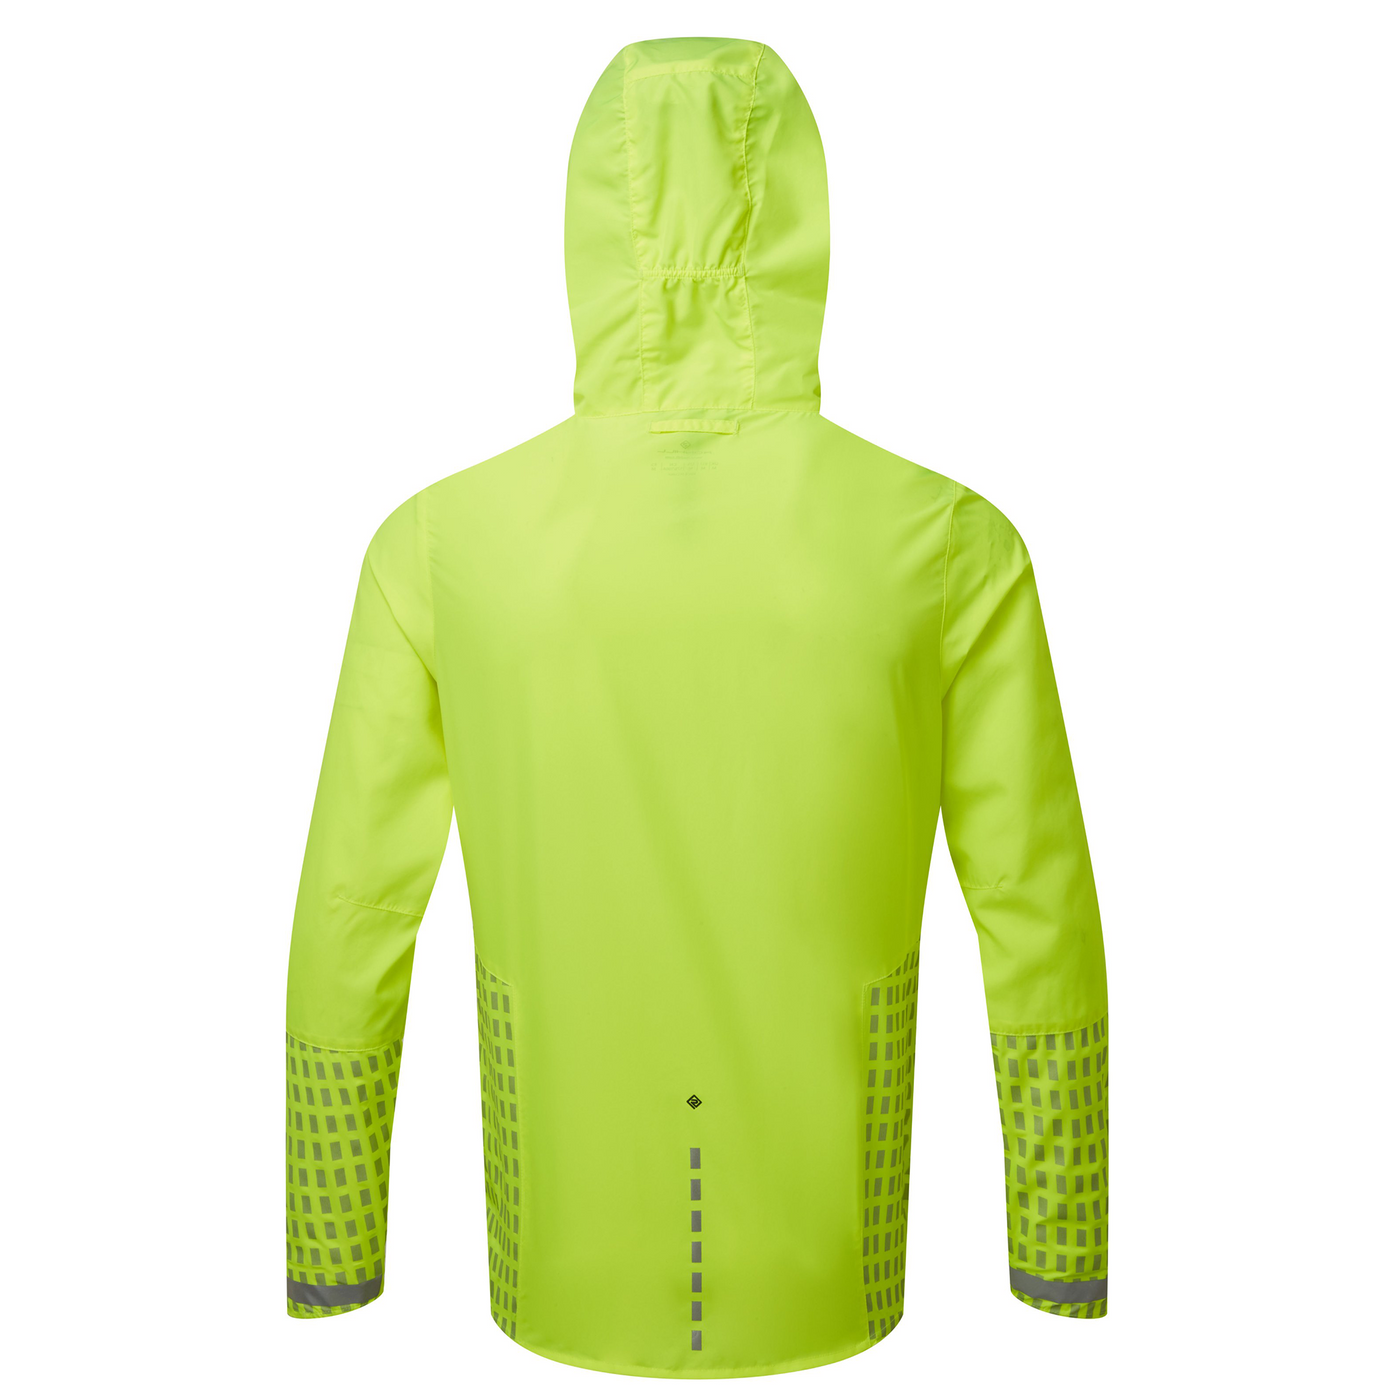 RonHill Mens Tech Afterhours Jacket - Fluo Yellow/Charcoal/Reflect